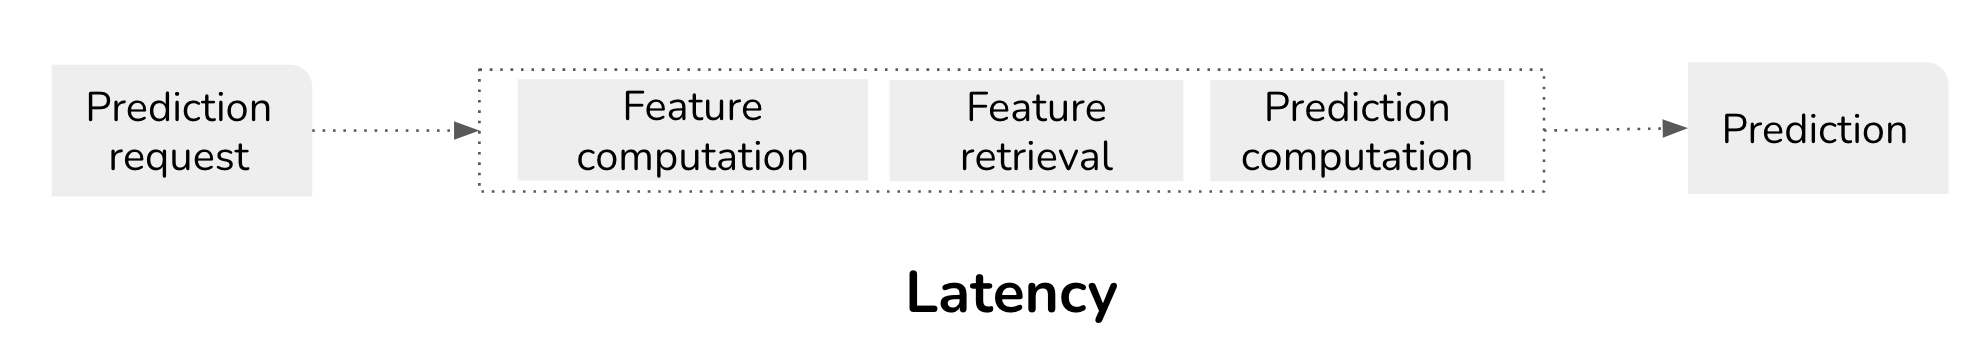 Causes for latency in online prediction